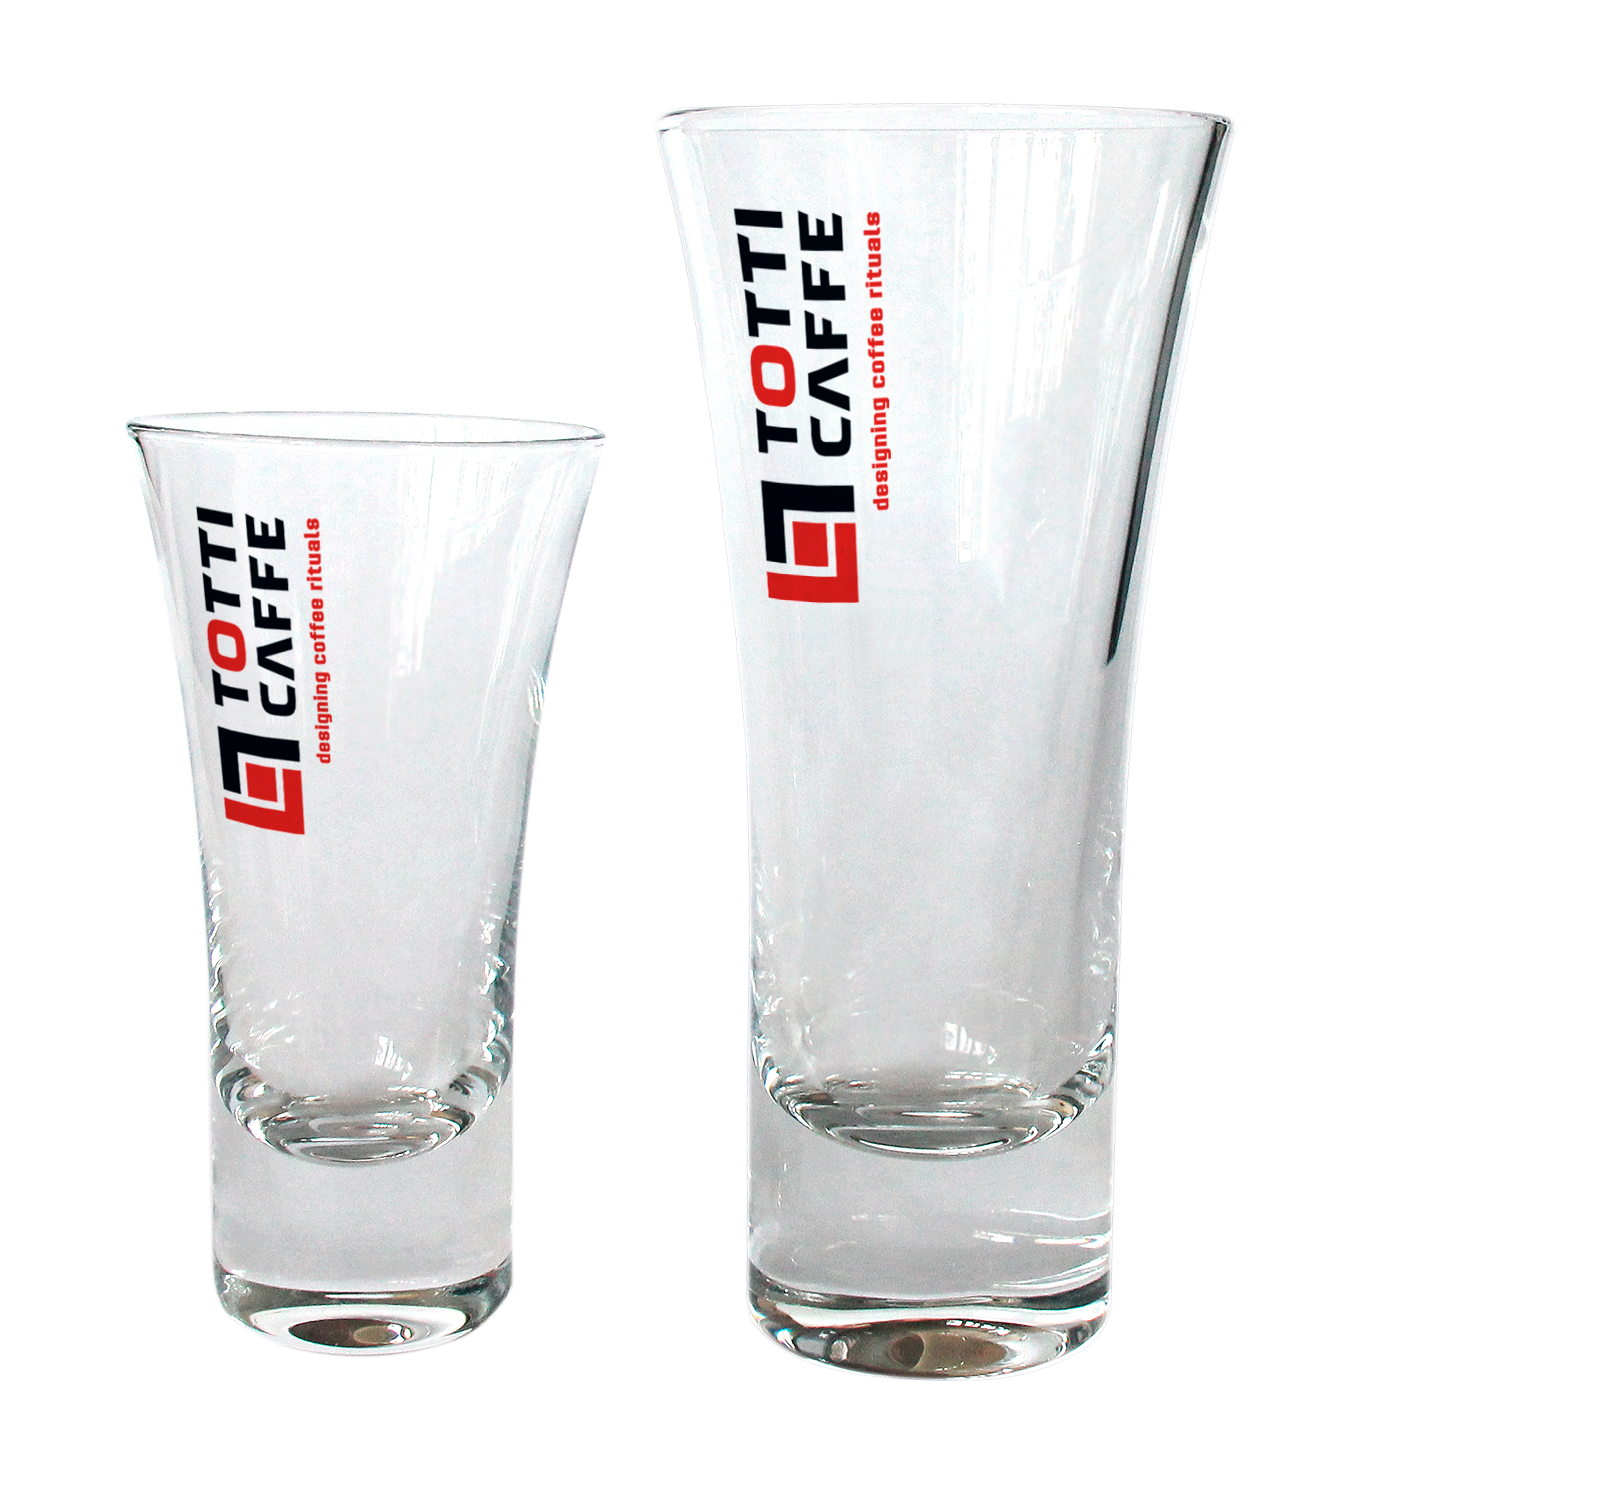 Glass from the TOTTI Caffe brand